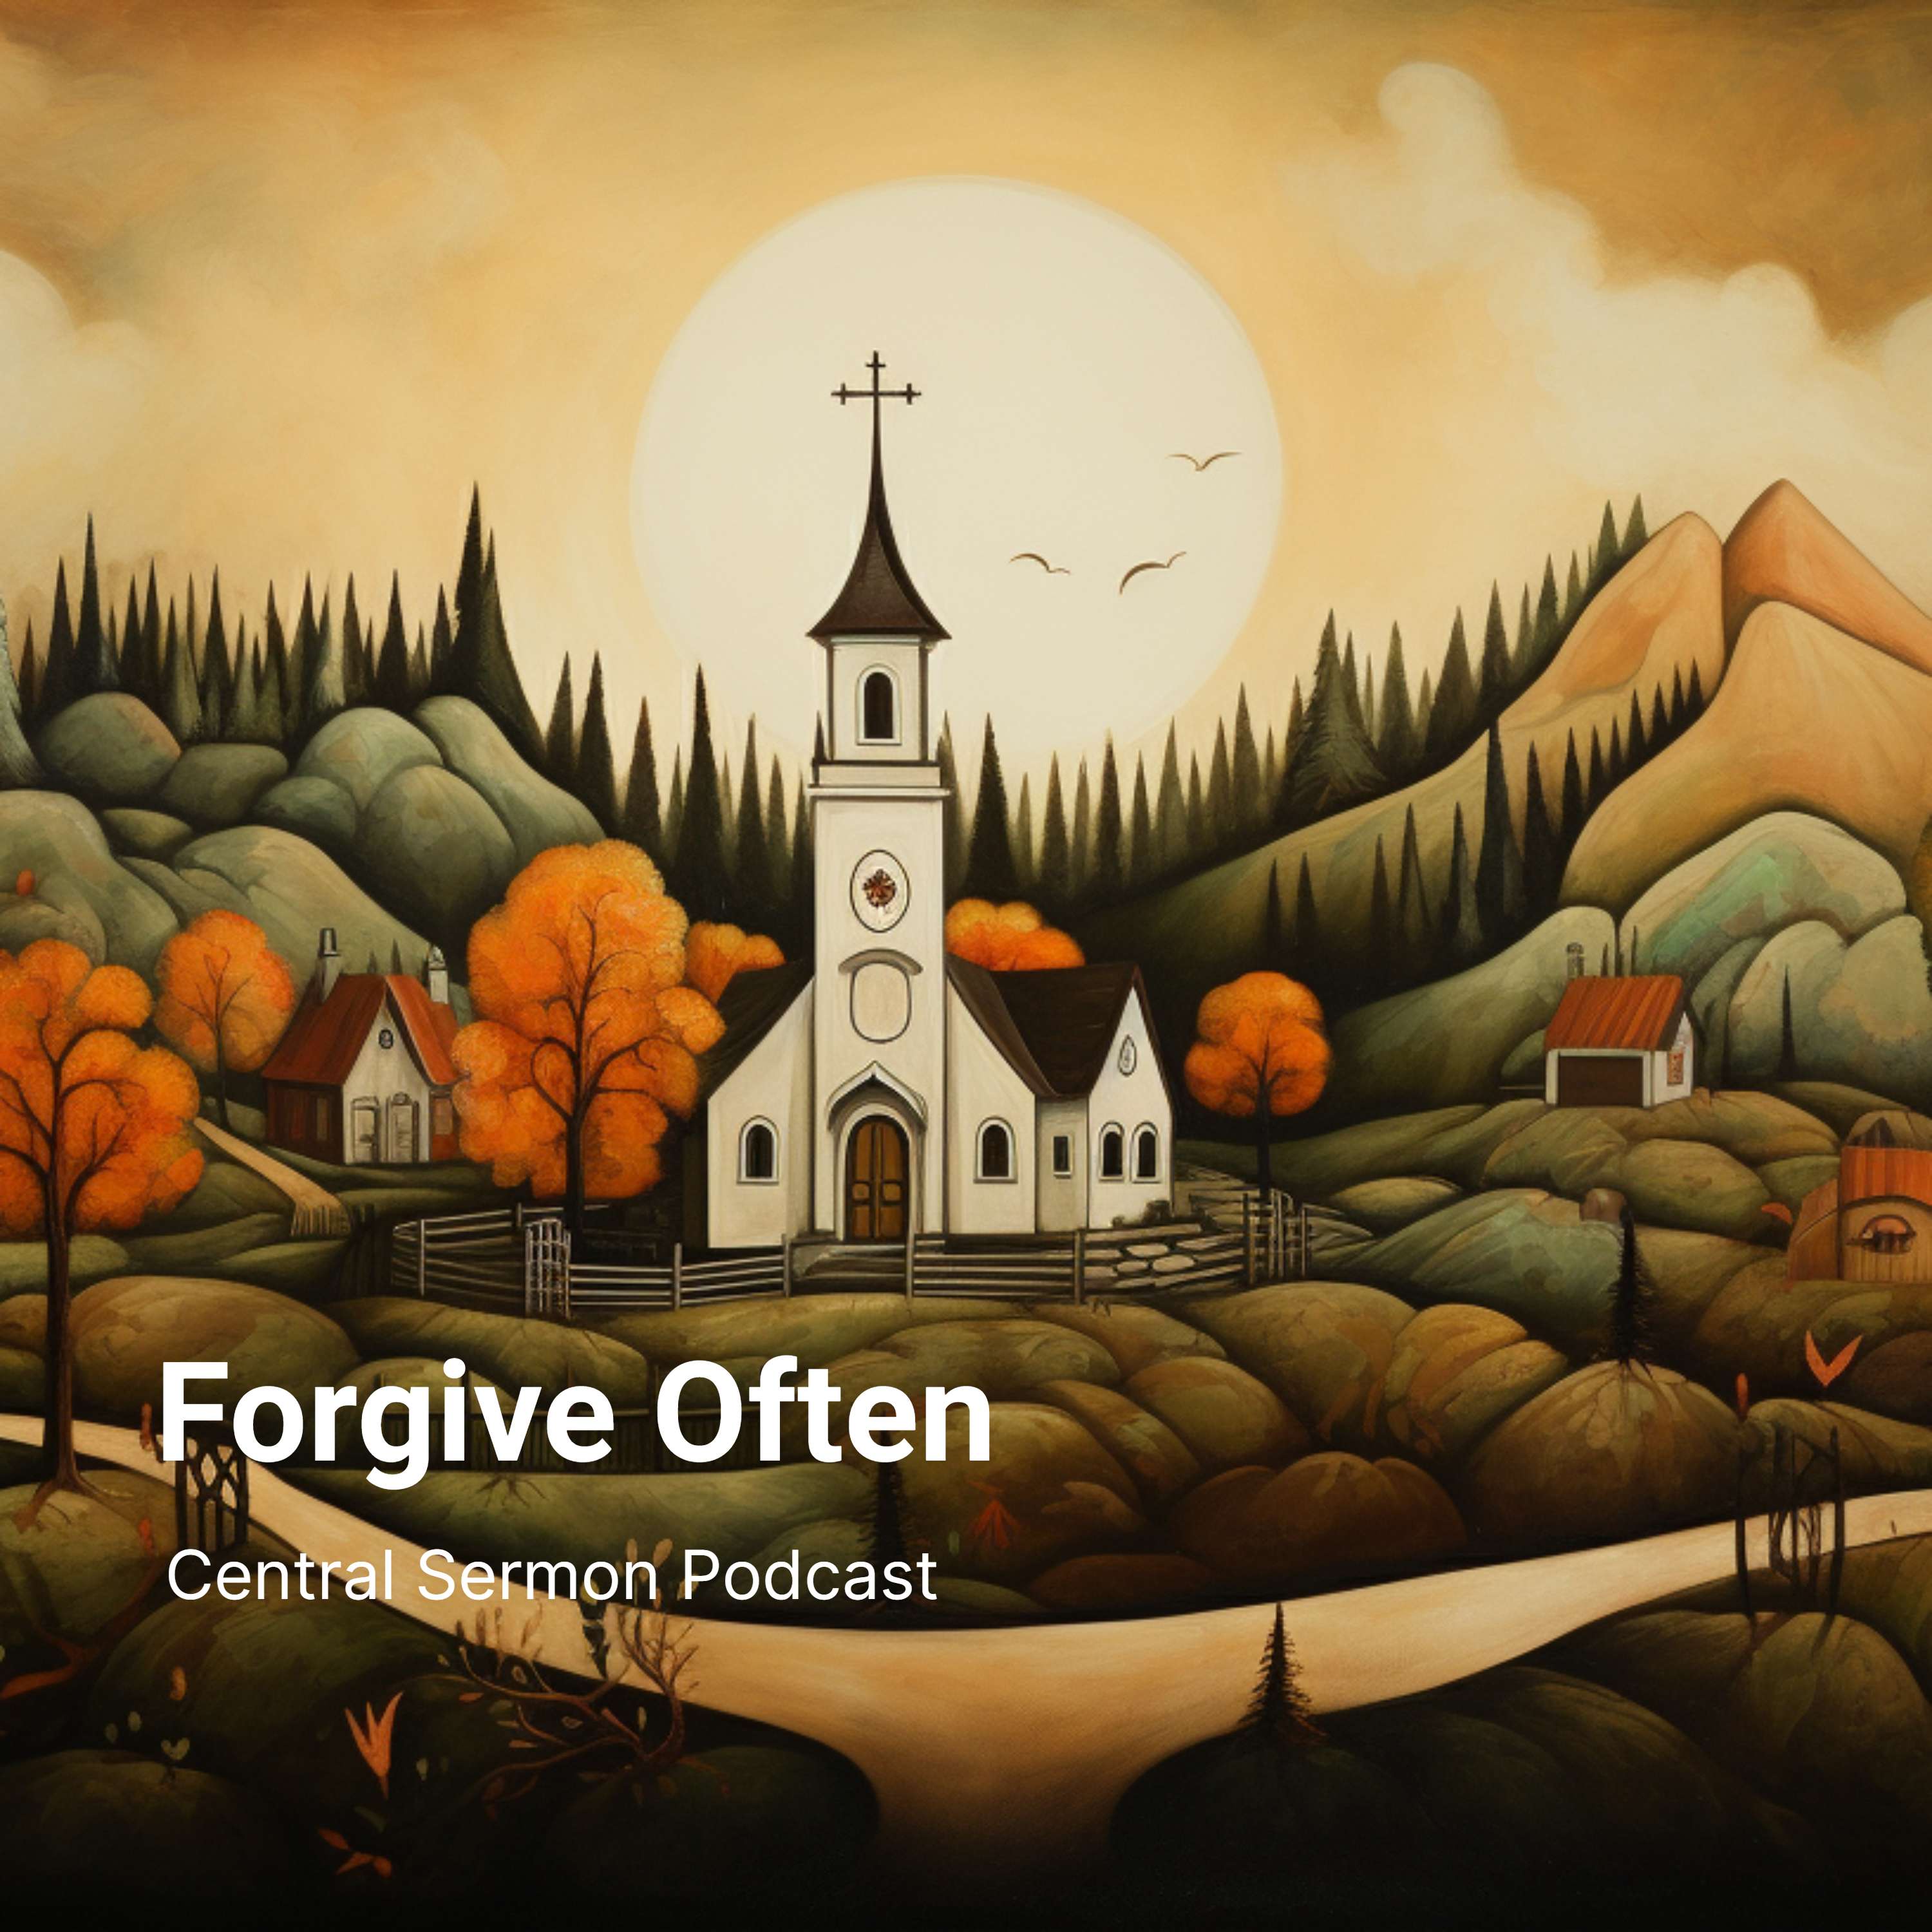 Forgive Quickly (No Fighting in Church)